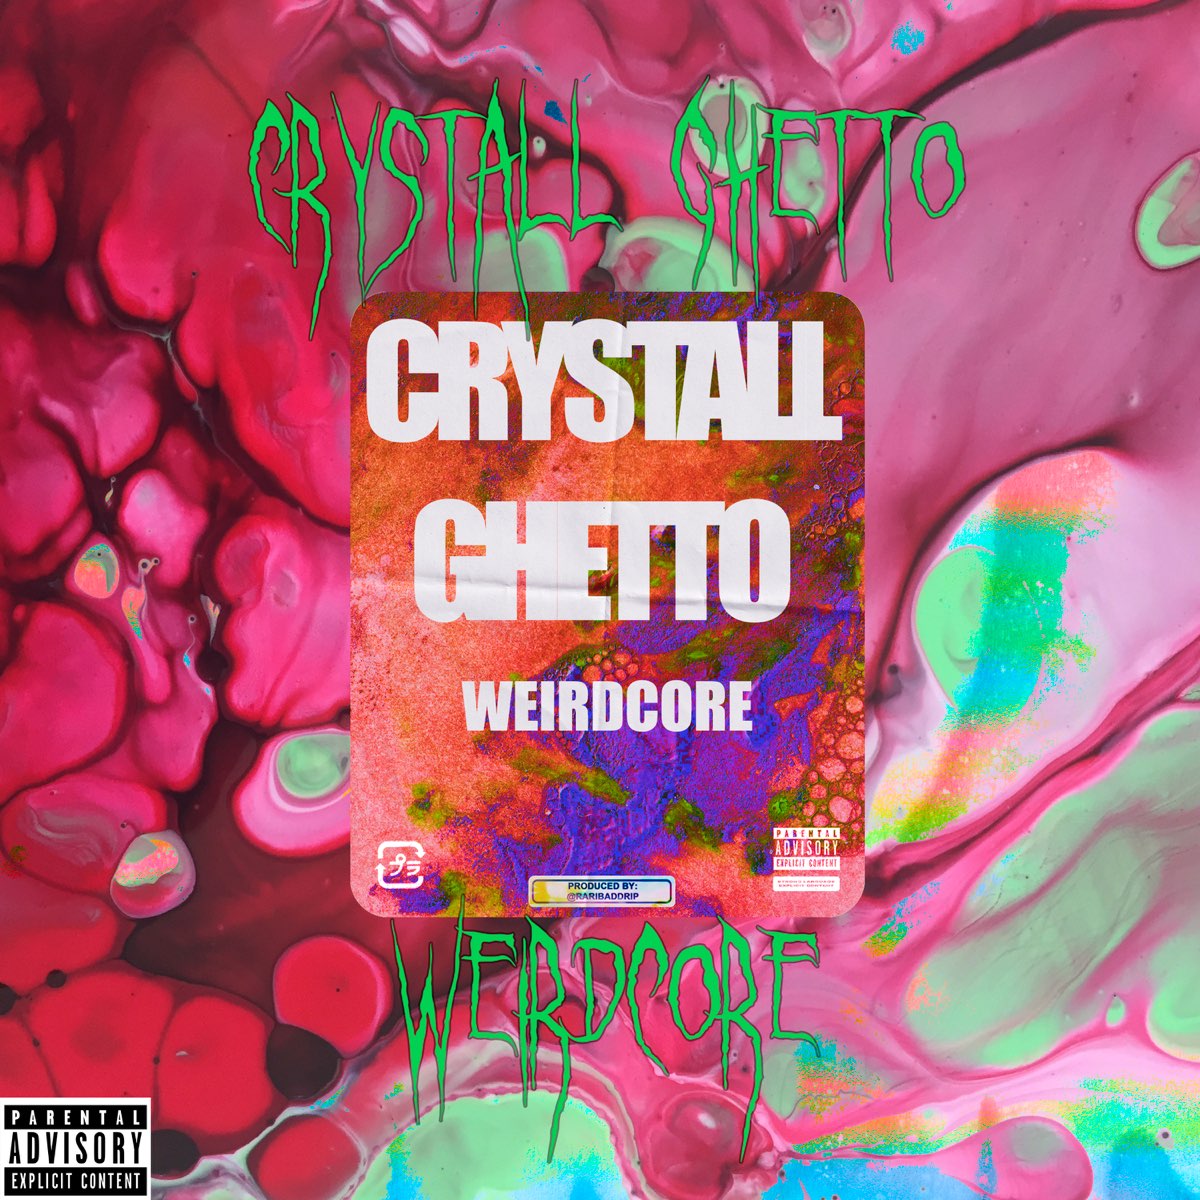 Download Weirdcore album songs: Why i am still lost here